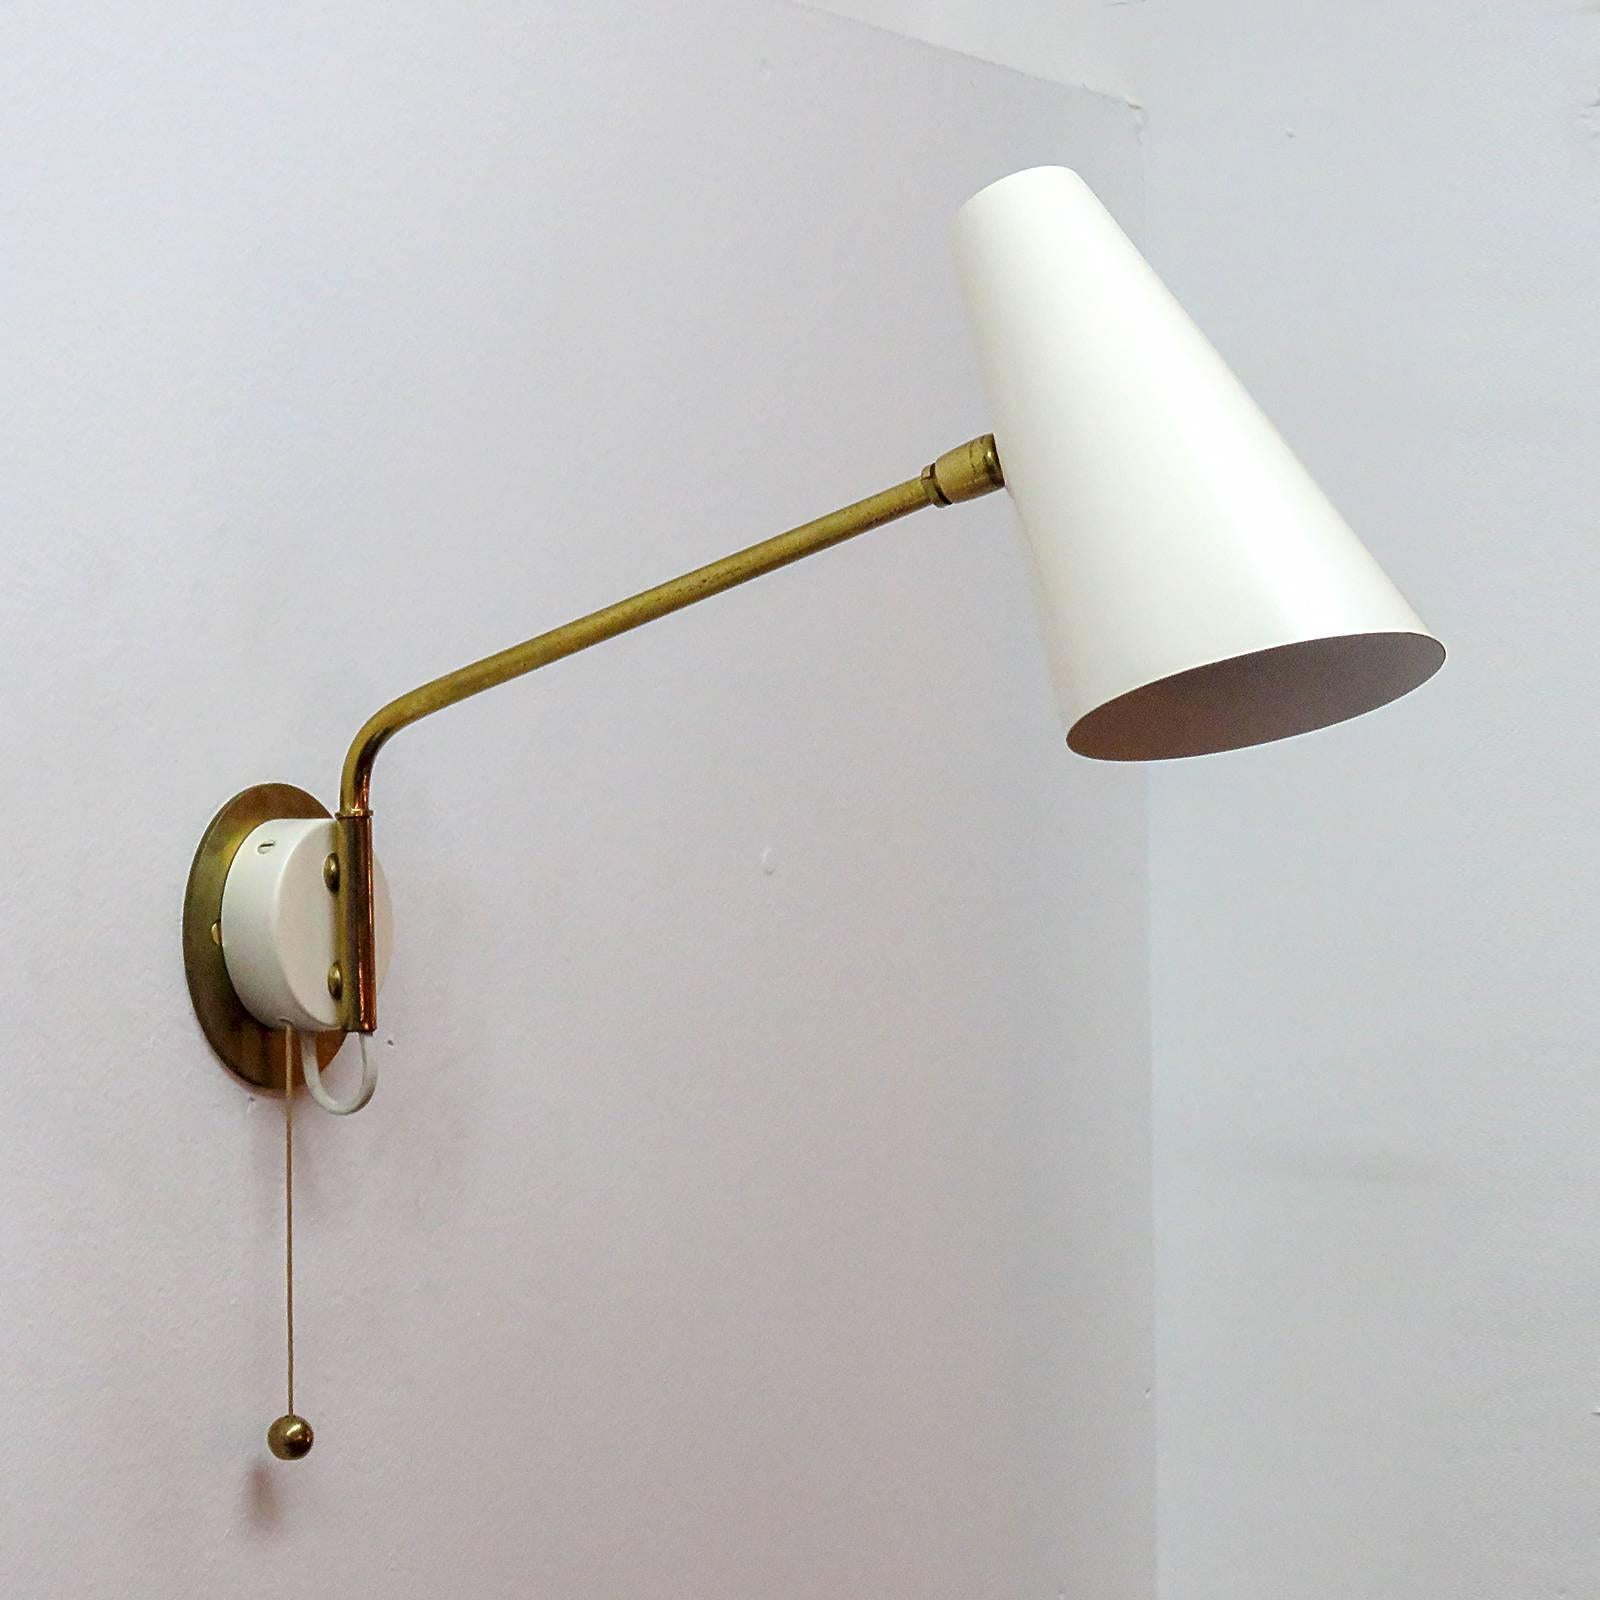 Elegant wall lights with articulate brass swing arms by Stilnovo with adjustable egg-shell color shade and pull switch.